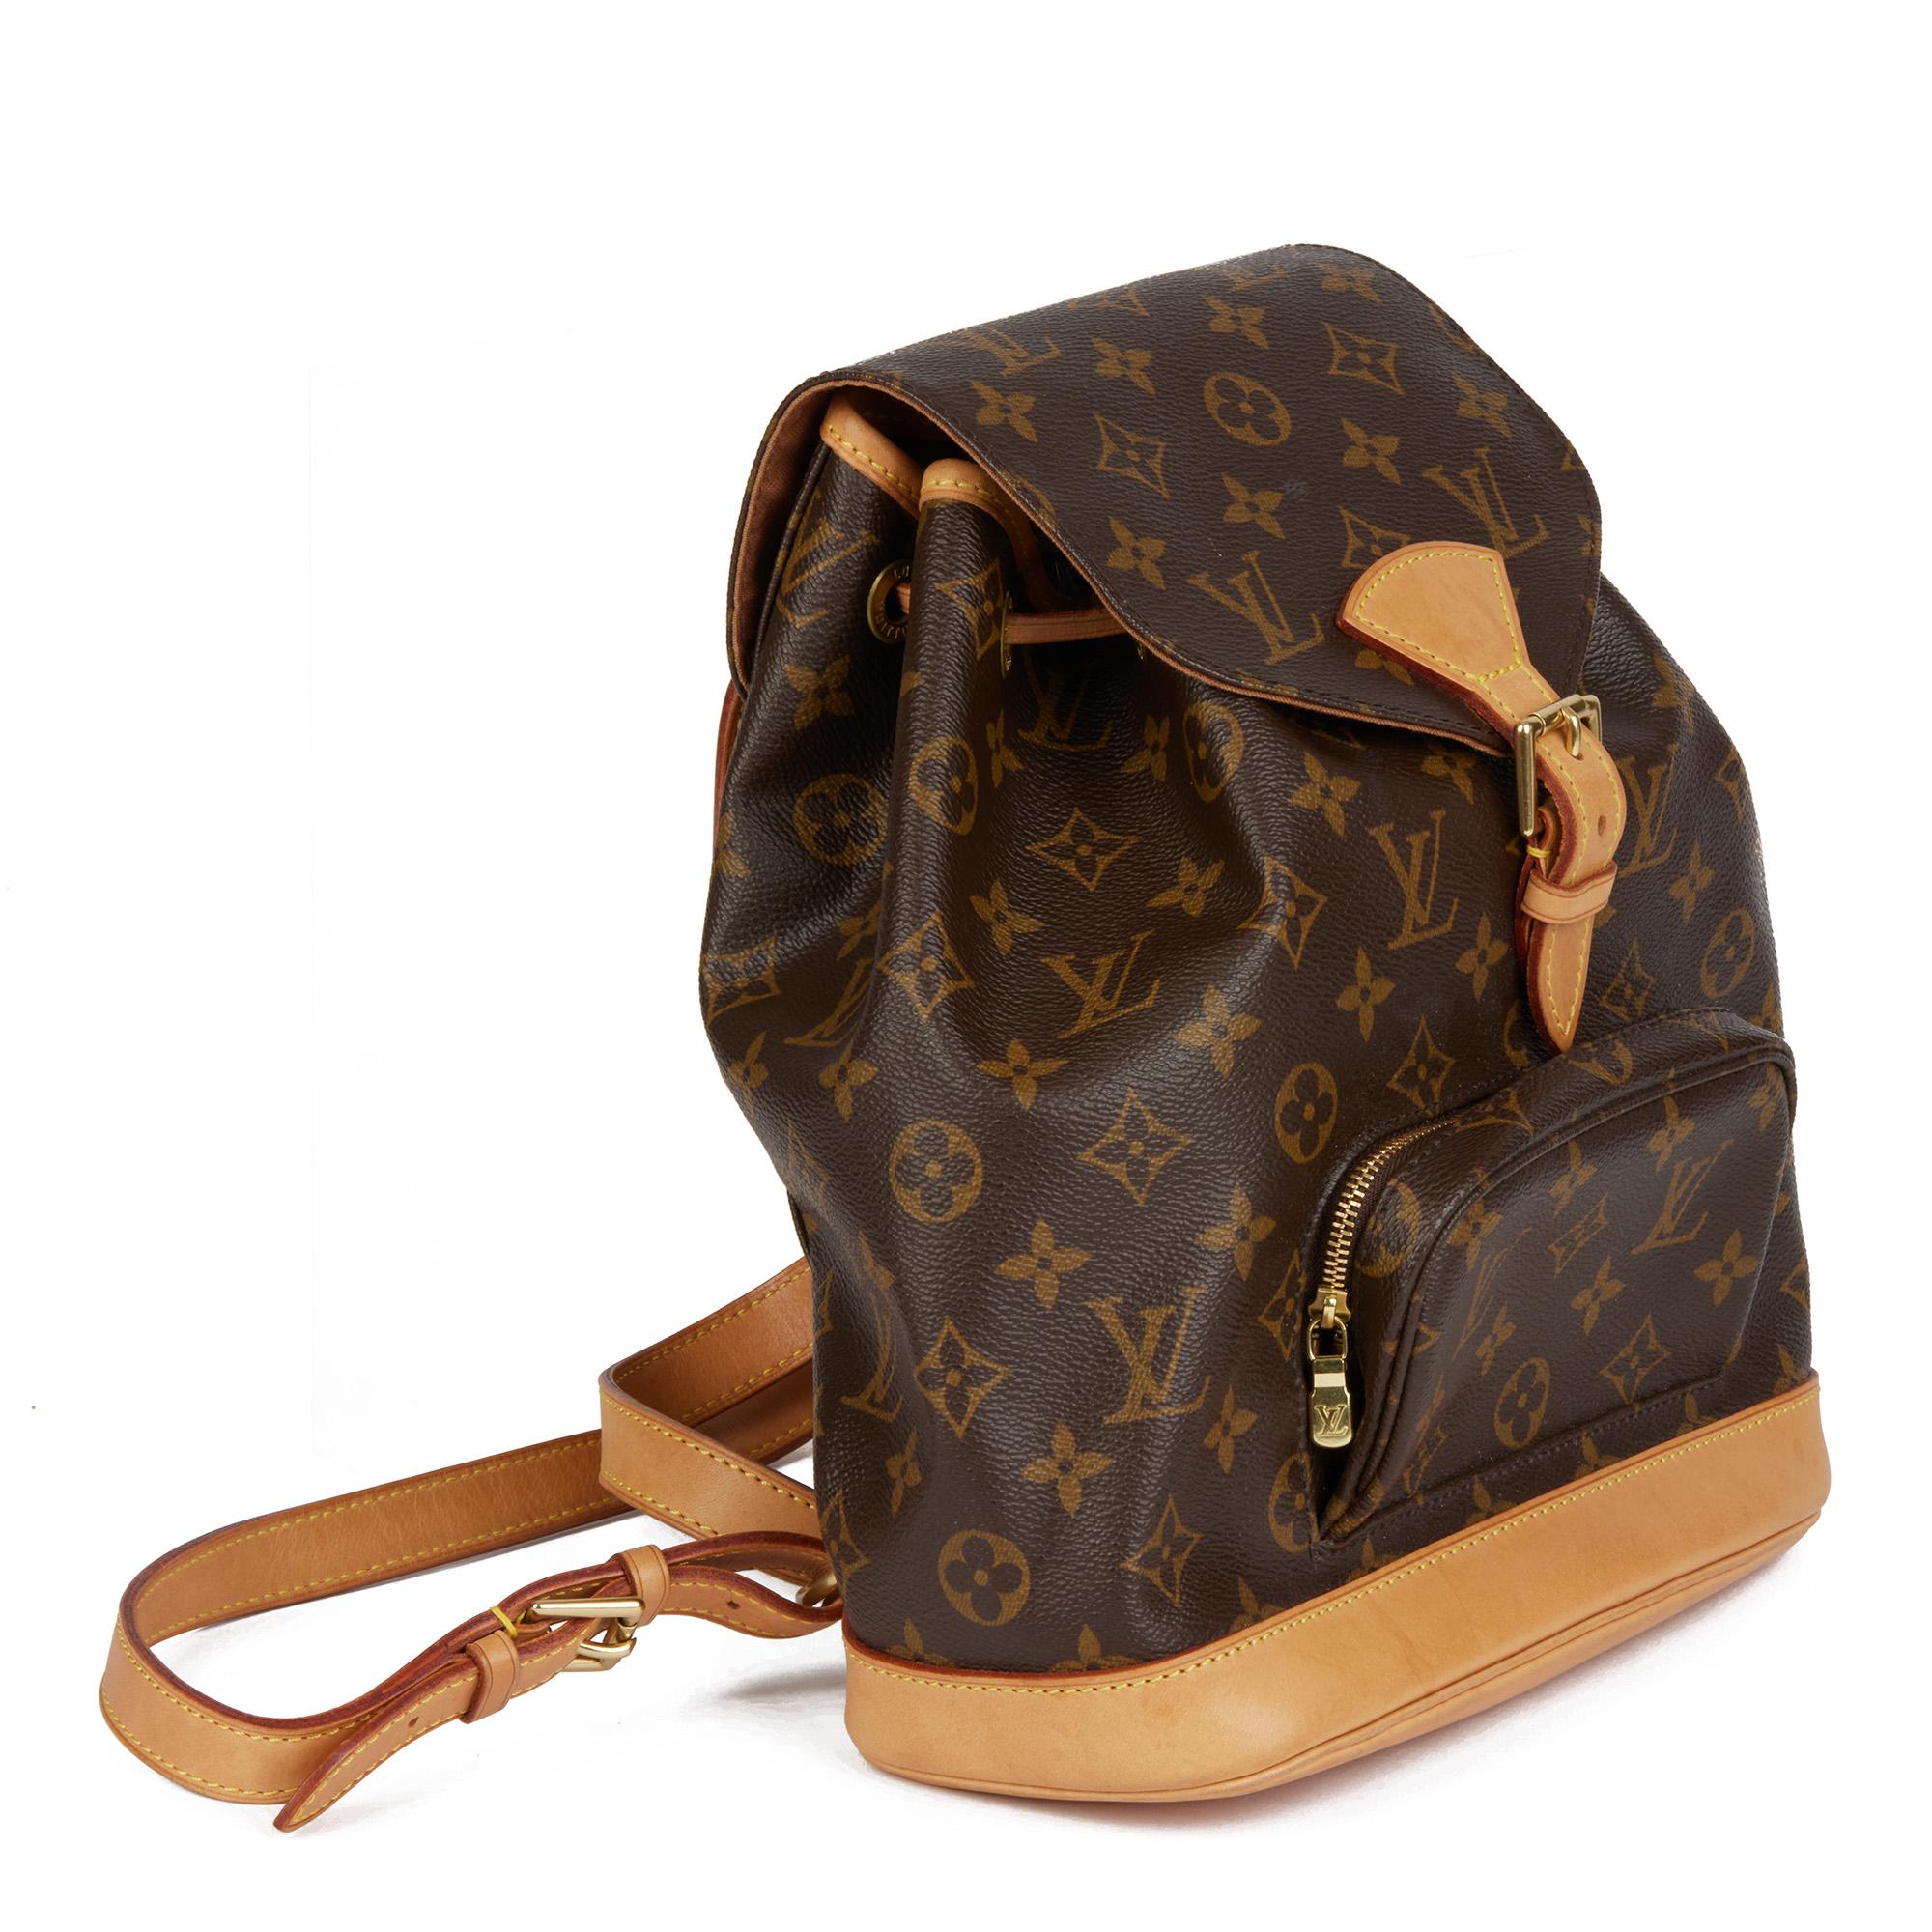 LOUIS VUITTON
Brown Monogram Coated Canvas & Vachetta Leather Monstorious MM

Serial Number: SP1024
Age (Circa): 2004
Accompanied By: Louis Vuitton Dust Bag
Authenticity Details: Date Stamp (Made in France)
Gender: Ladies
Type: Backpack

Colour: